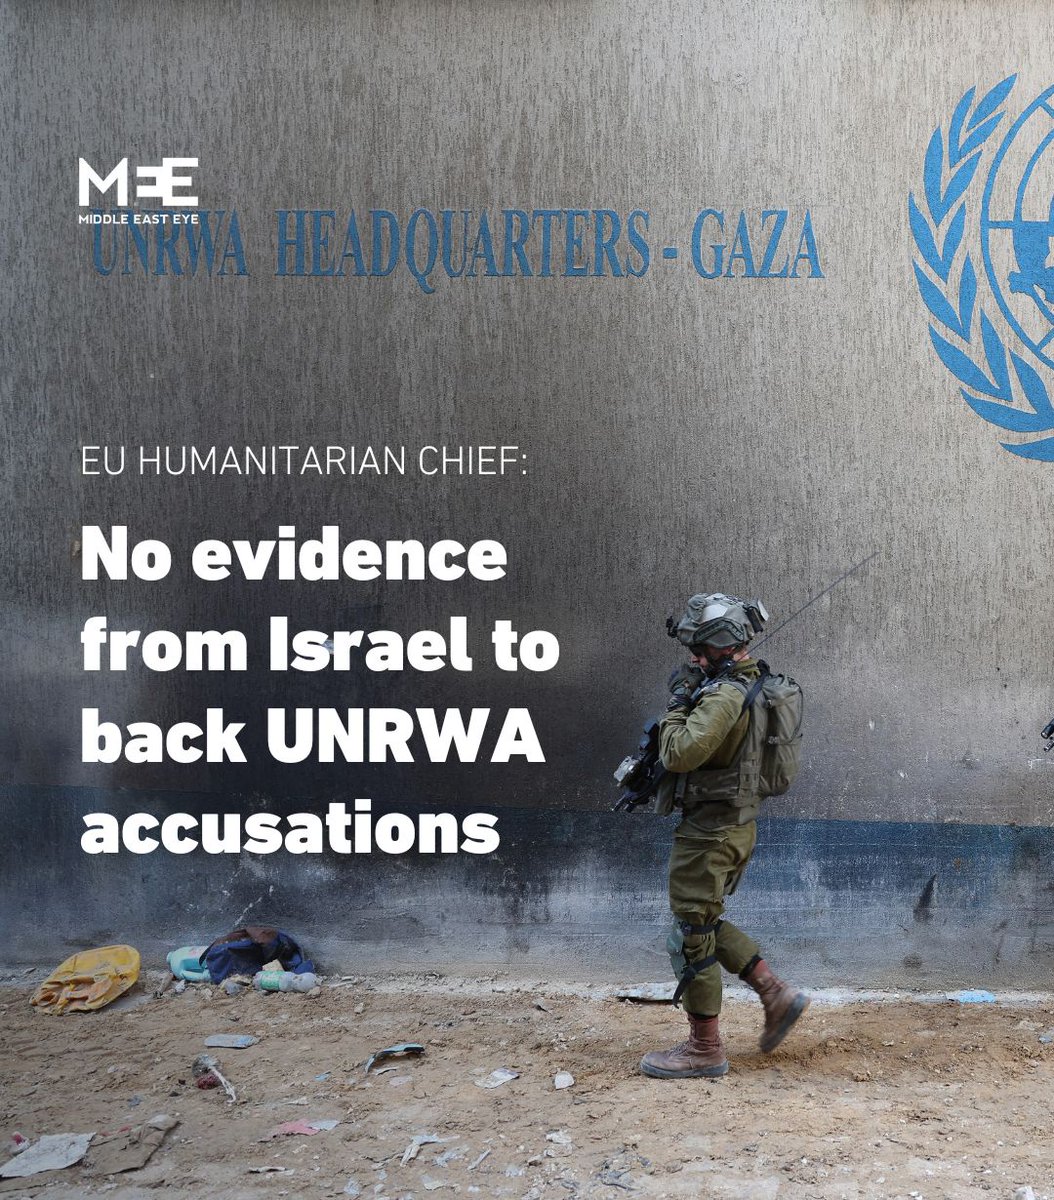 The European Union's top humanitarian aid official said he had seen no evidence from Israel to back its accusations against staff from the U.N. Palestinian refugee agency (Unrwa)